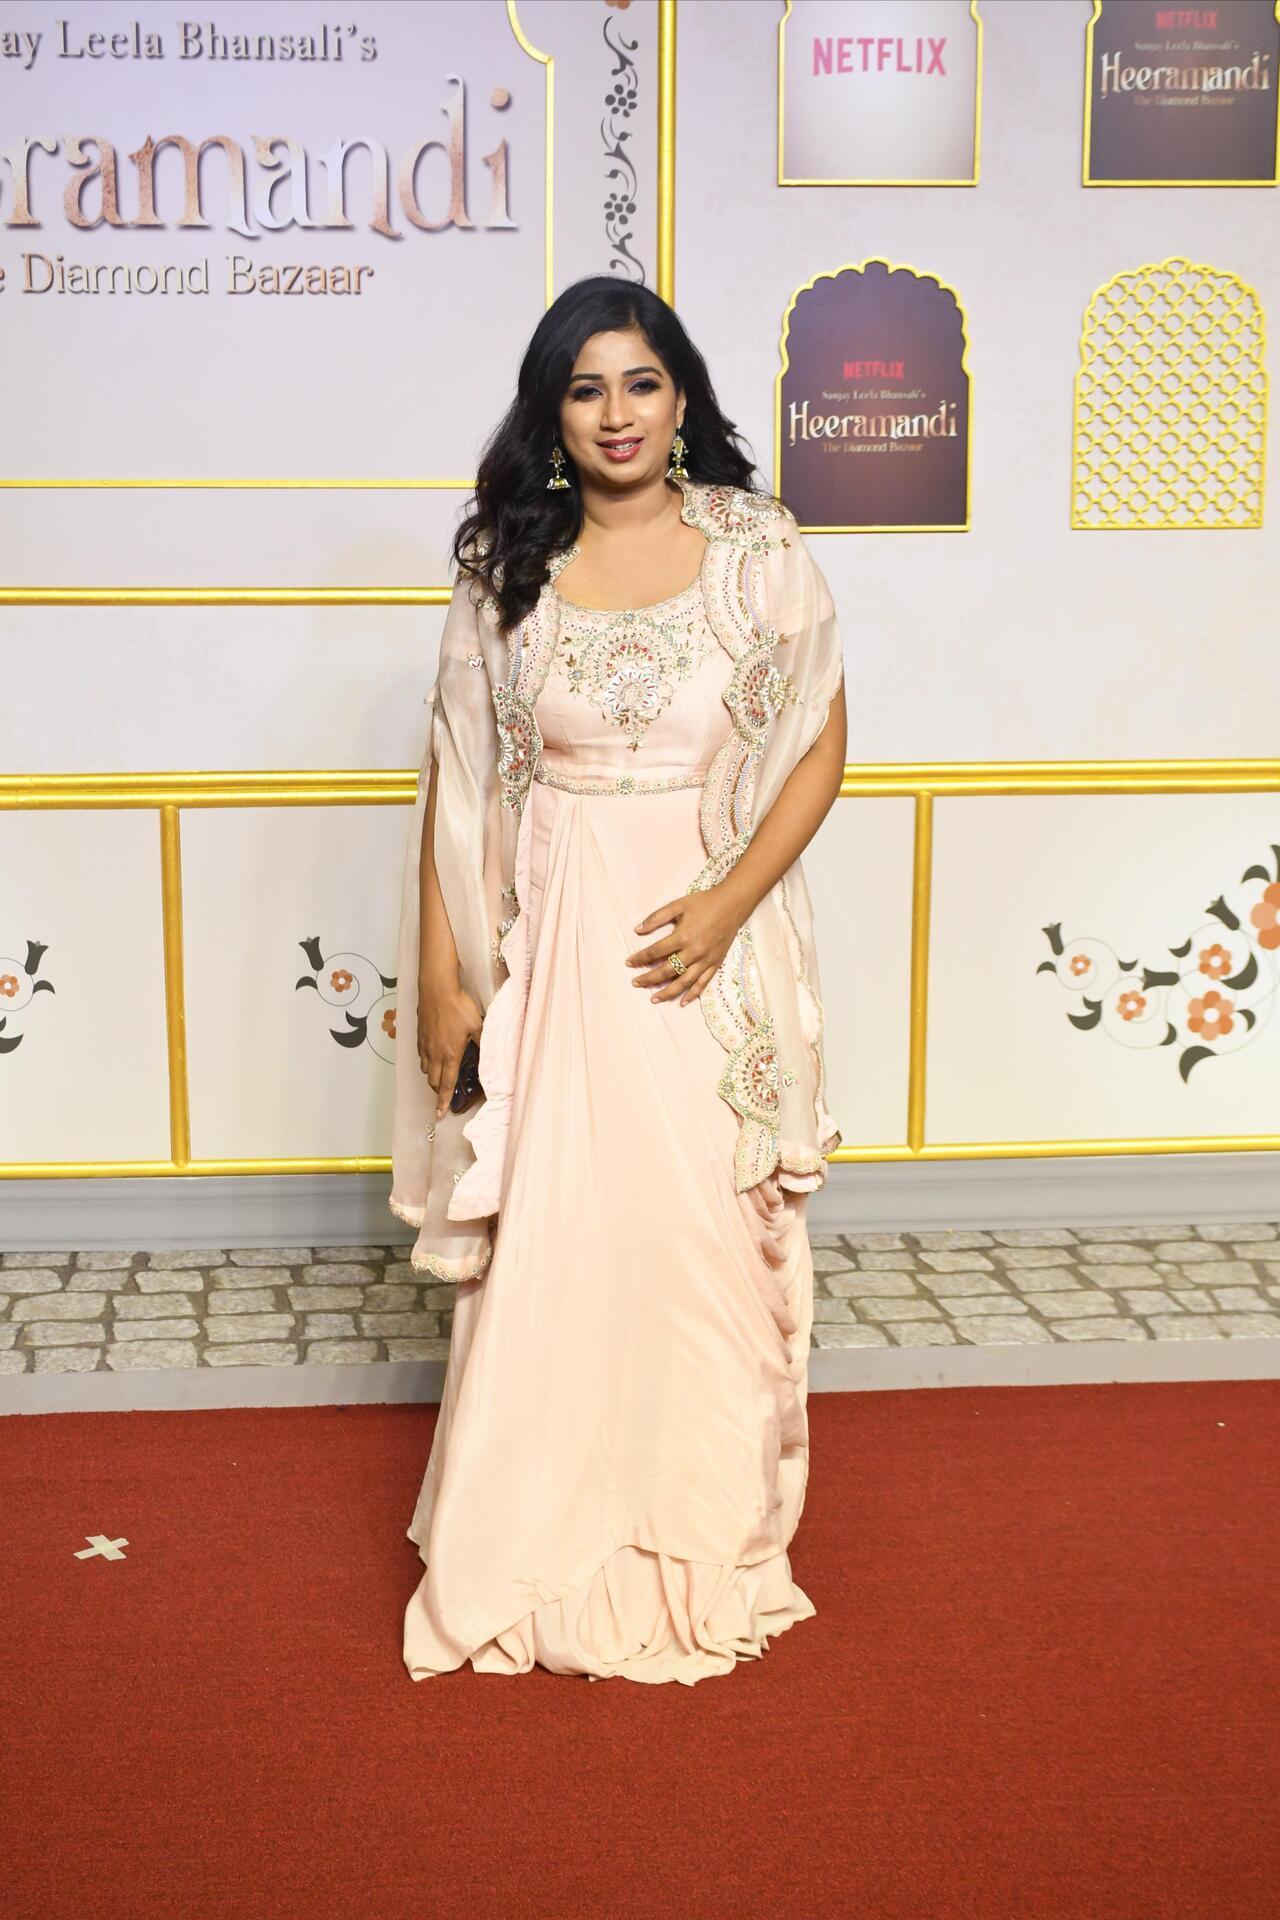 Singer Shreya Ghoshal also attended the premiere dressed in a pastel lehenga